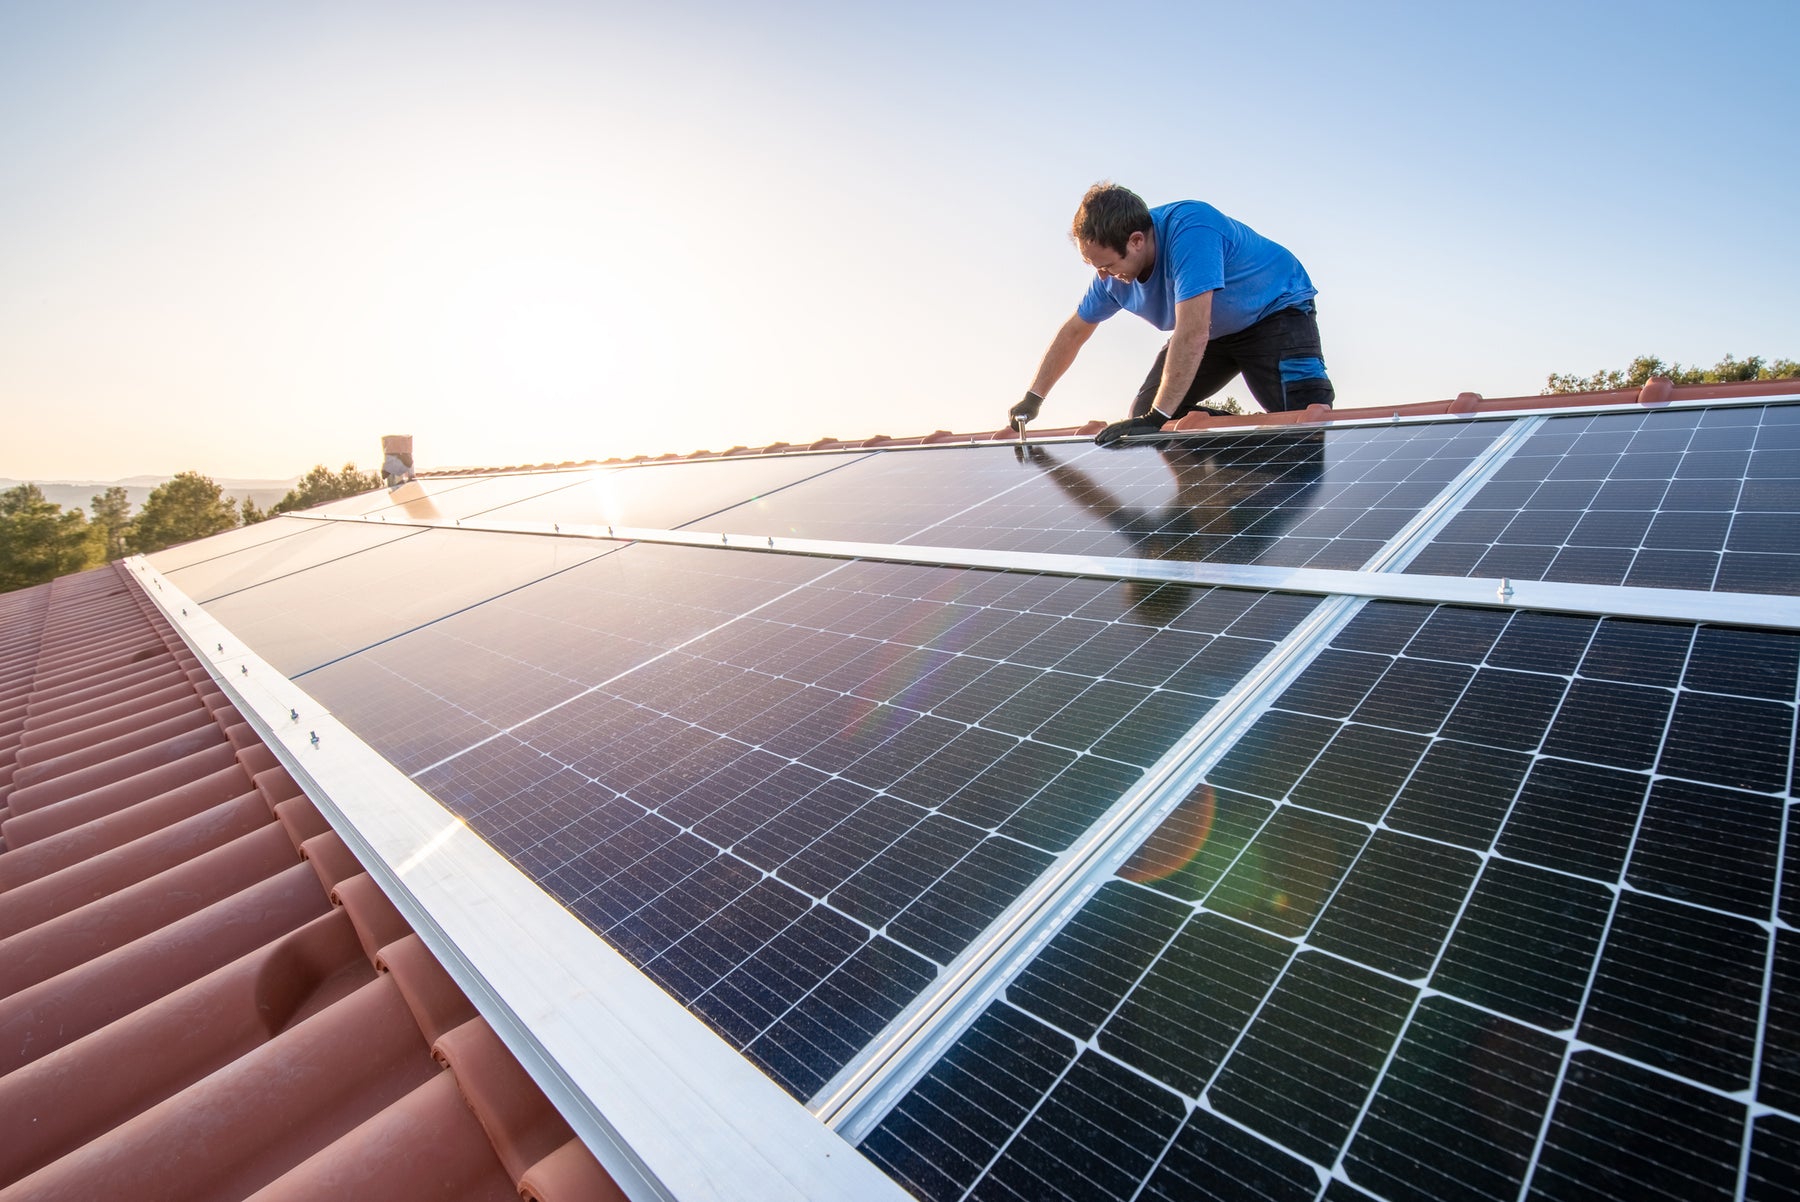 Self-install vs professional install for your solar panel system. Which one is right for you?